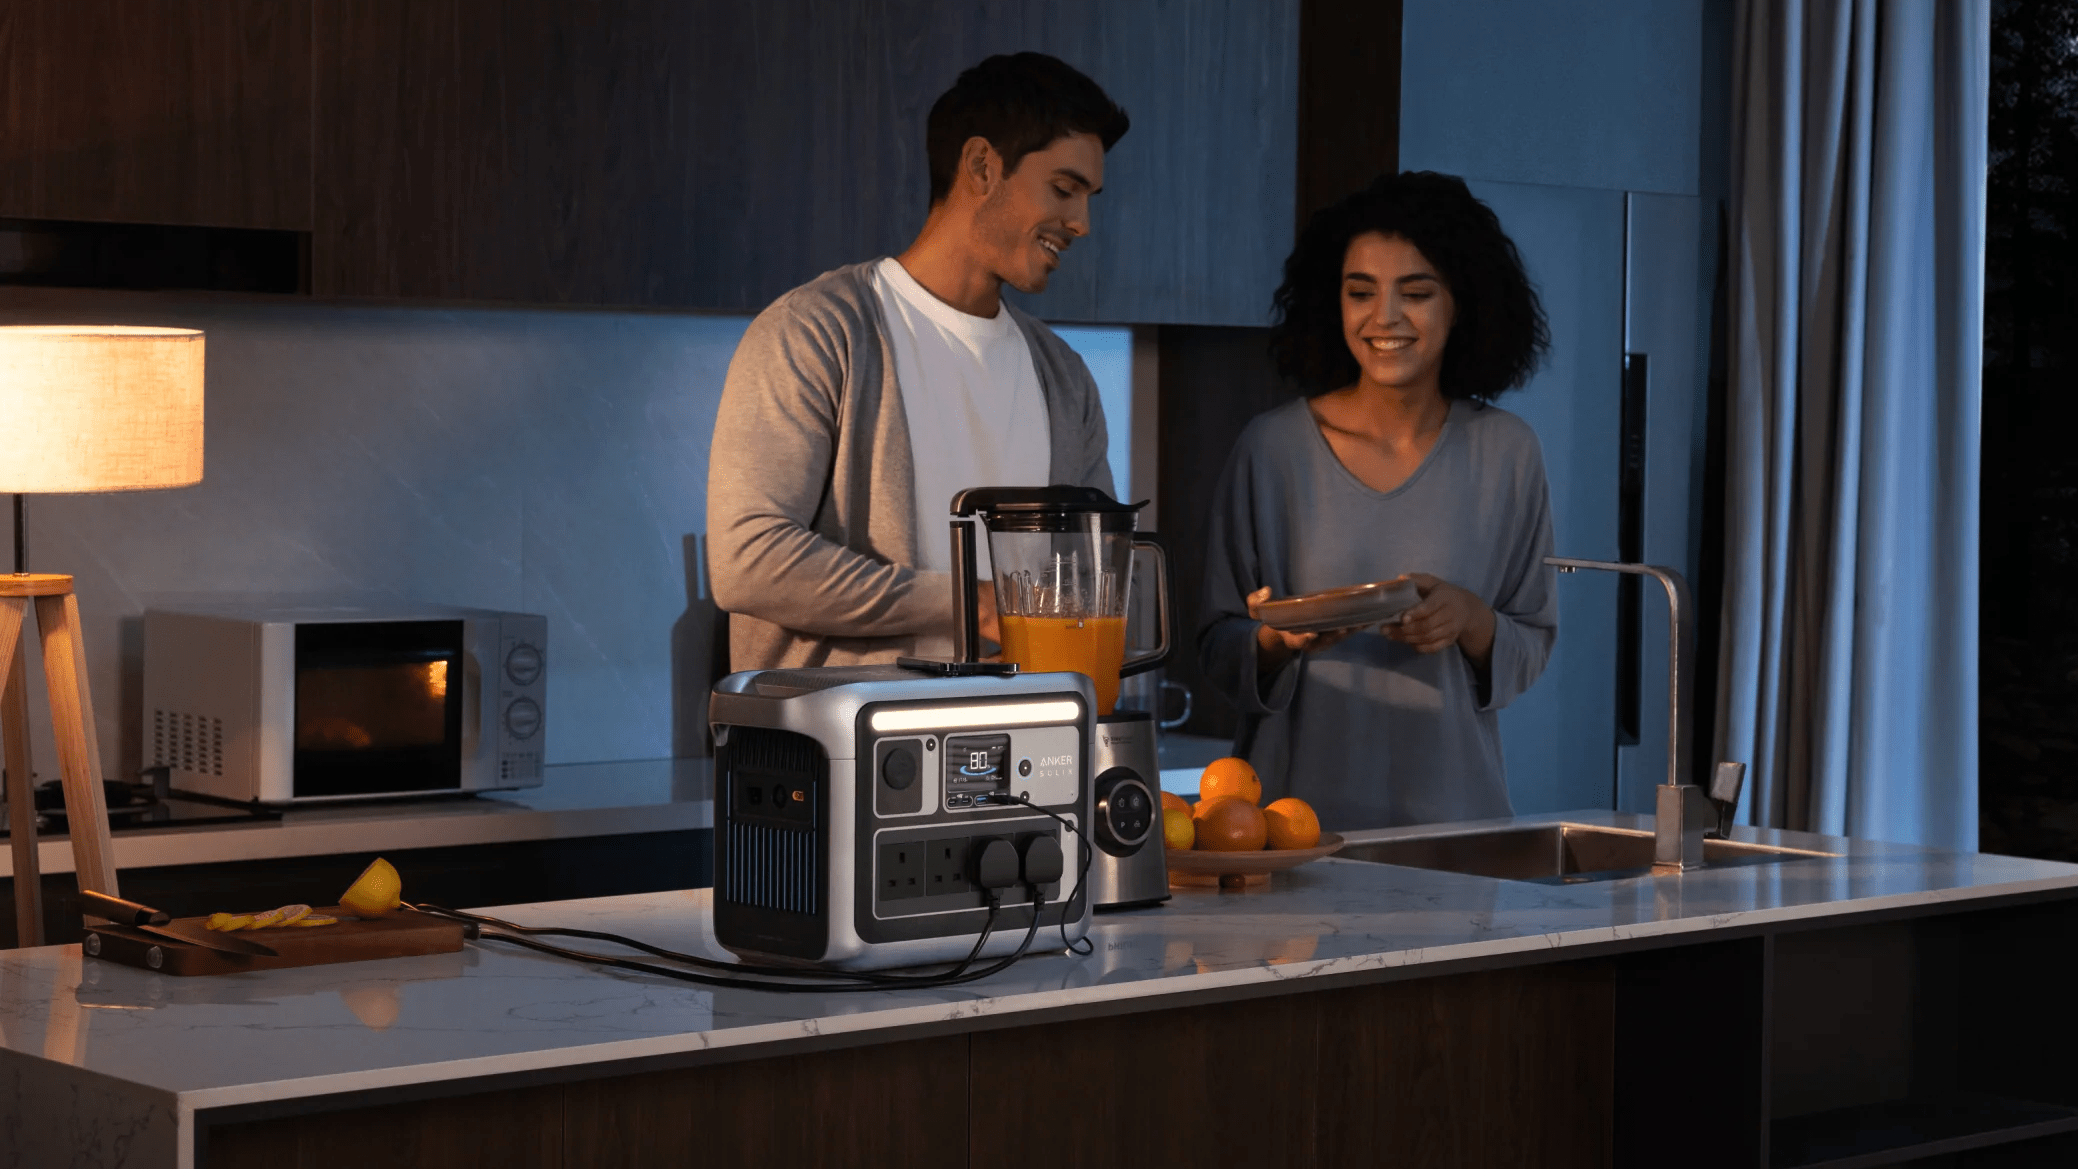 A couple power a blender, mobile device and other kitchen appliances from an Anker SOLIX C1000 portable power station